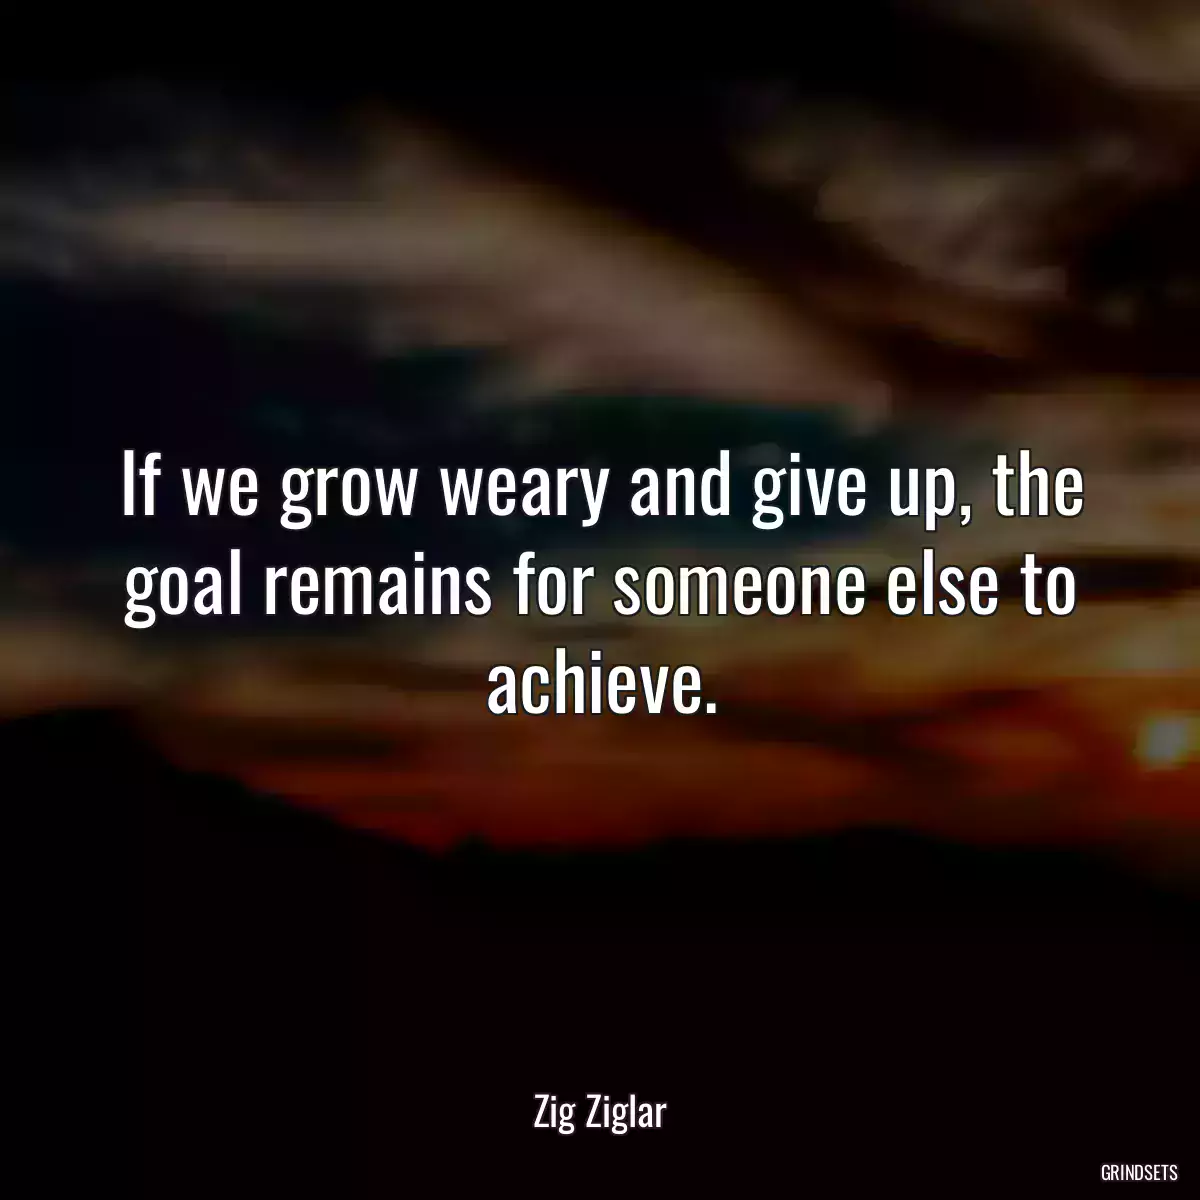 If we grow weary and give up, the goal remains for someone else to achieve.